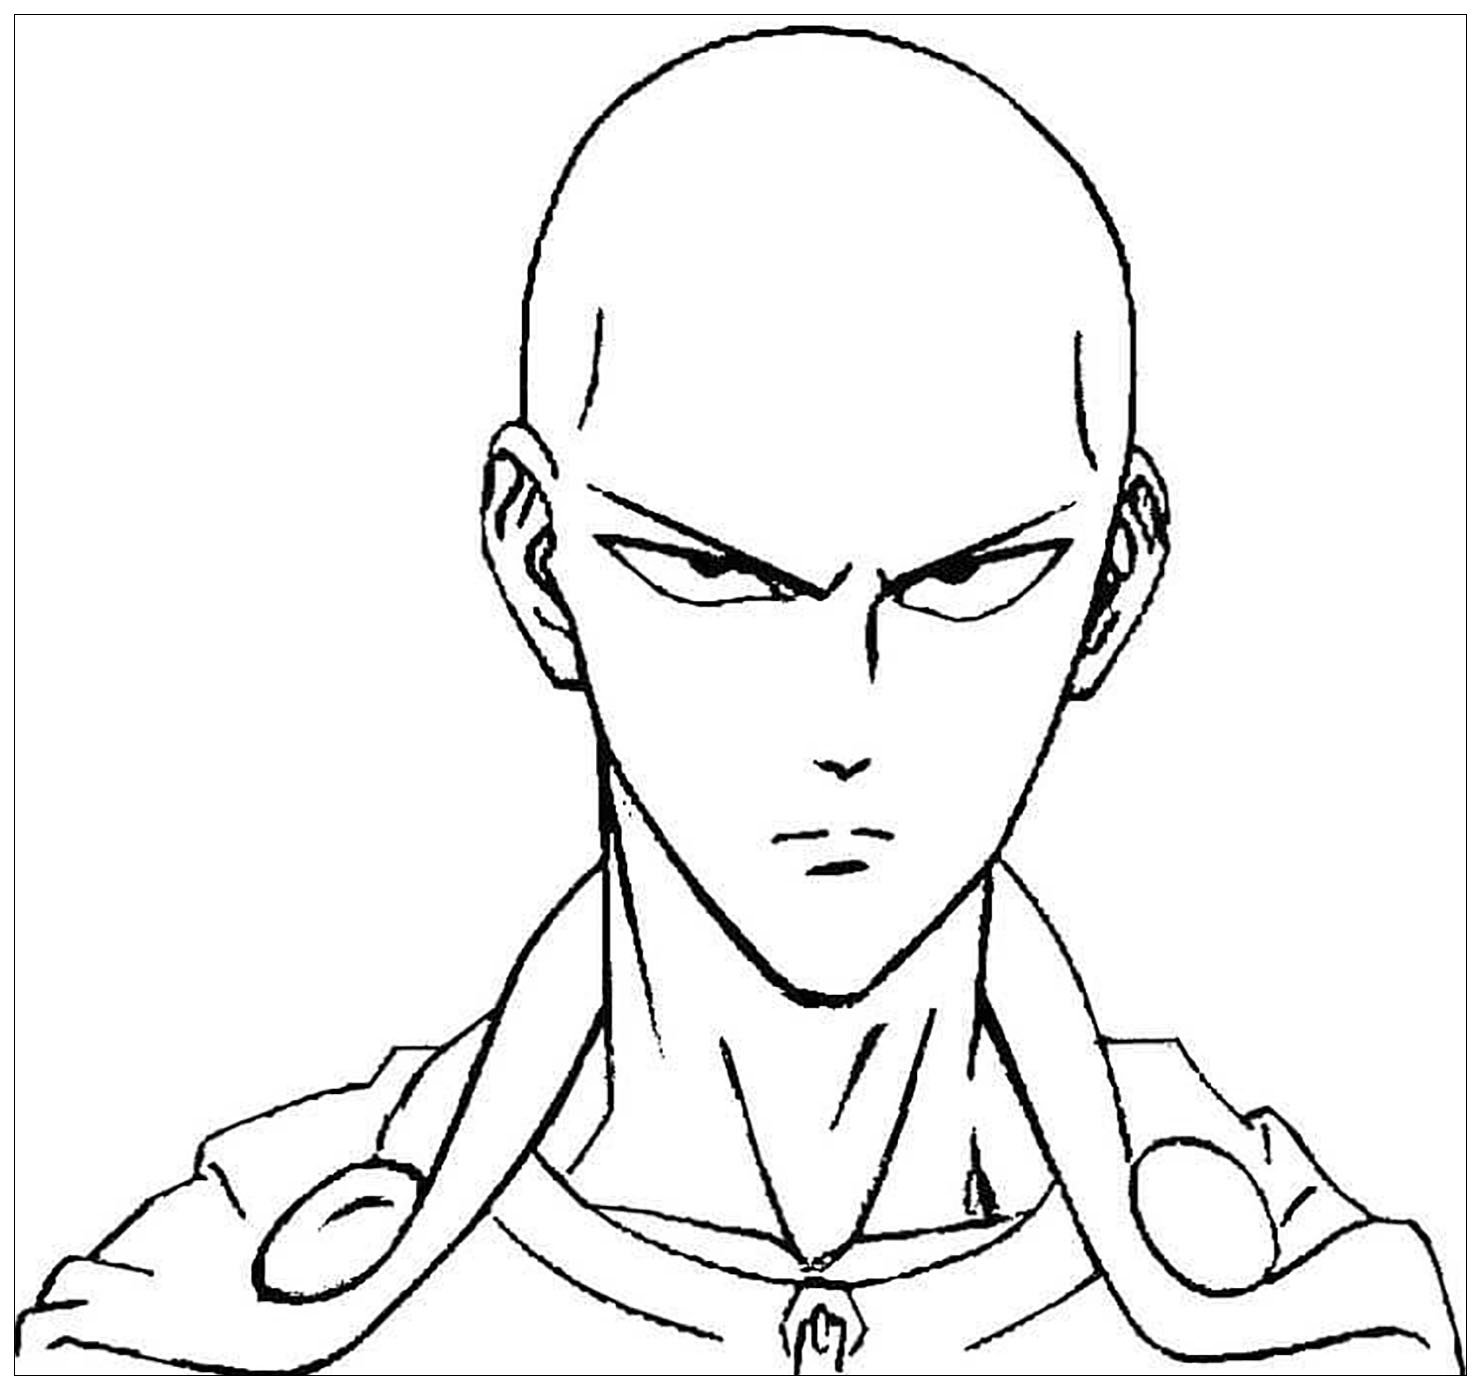 One Punch Man Coloring Pages One punch man to print : Free Coloring Pages